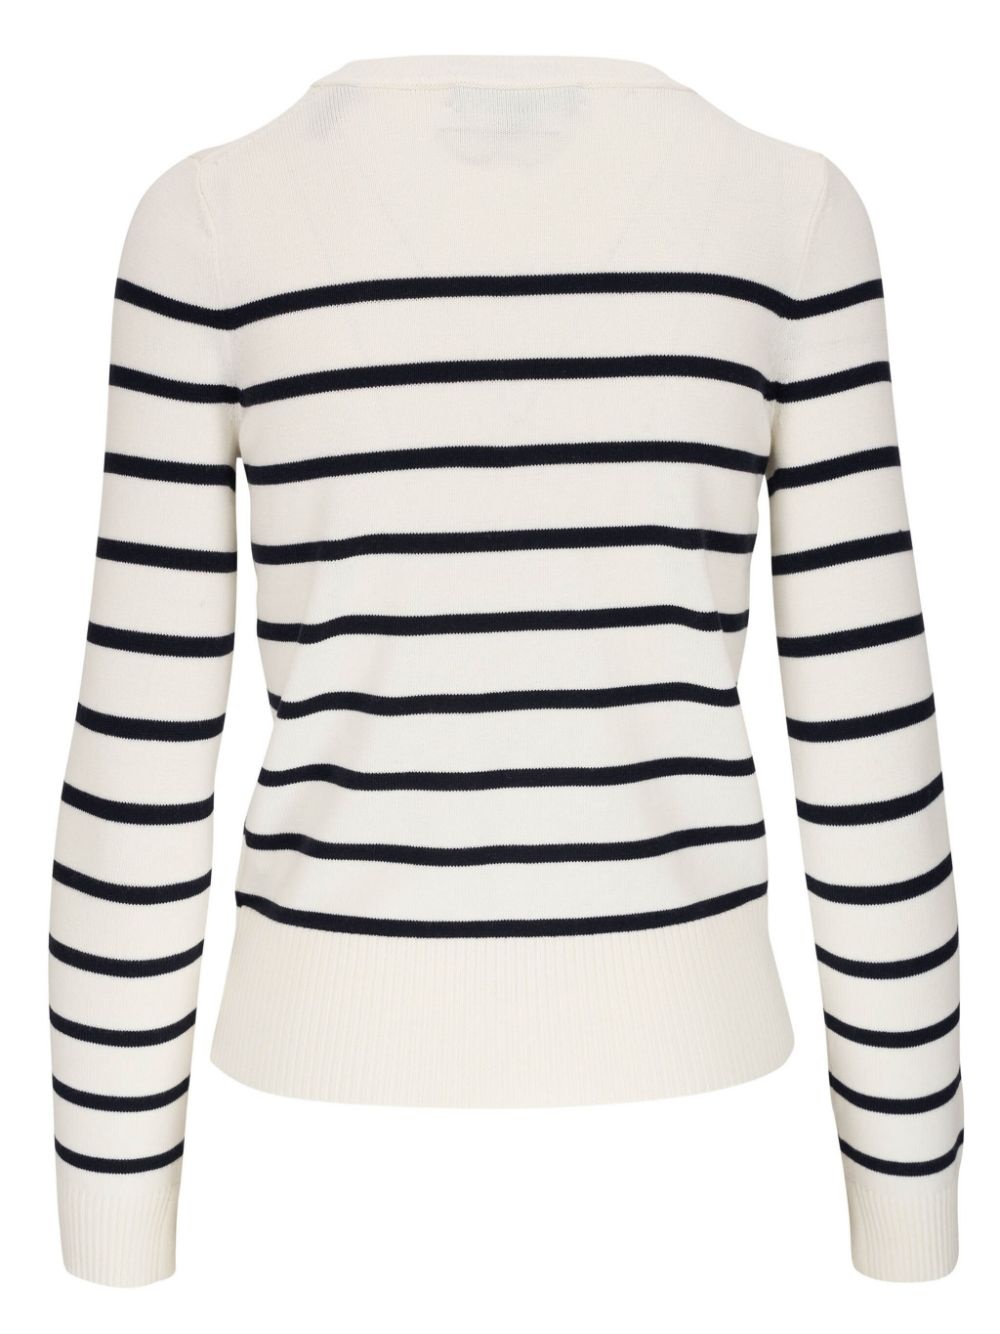 Dianora striped knitted top - 2